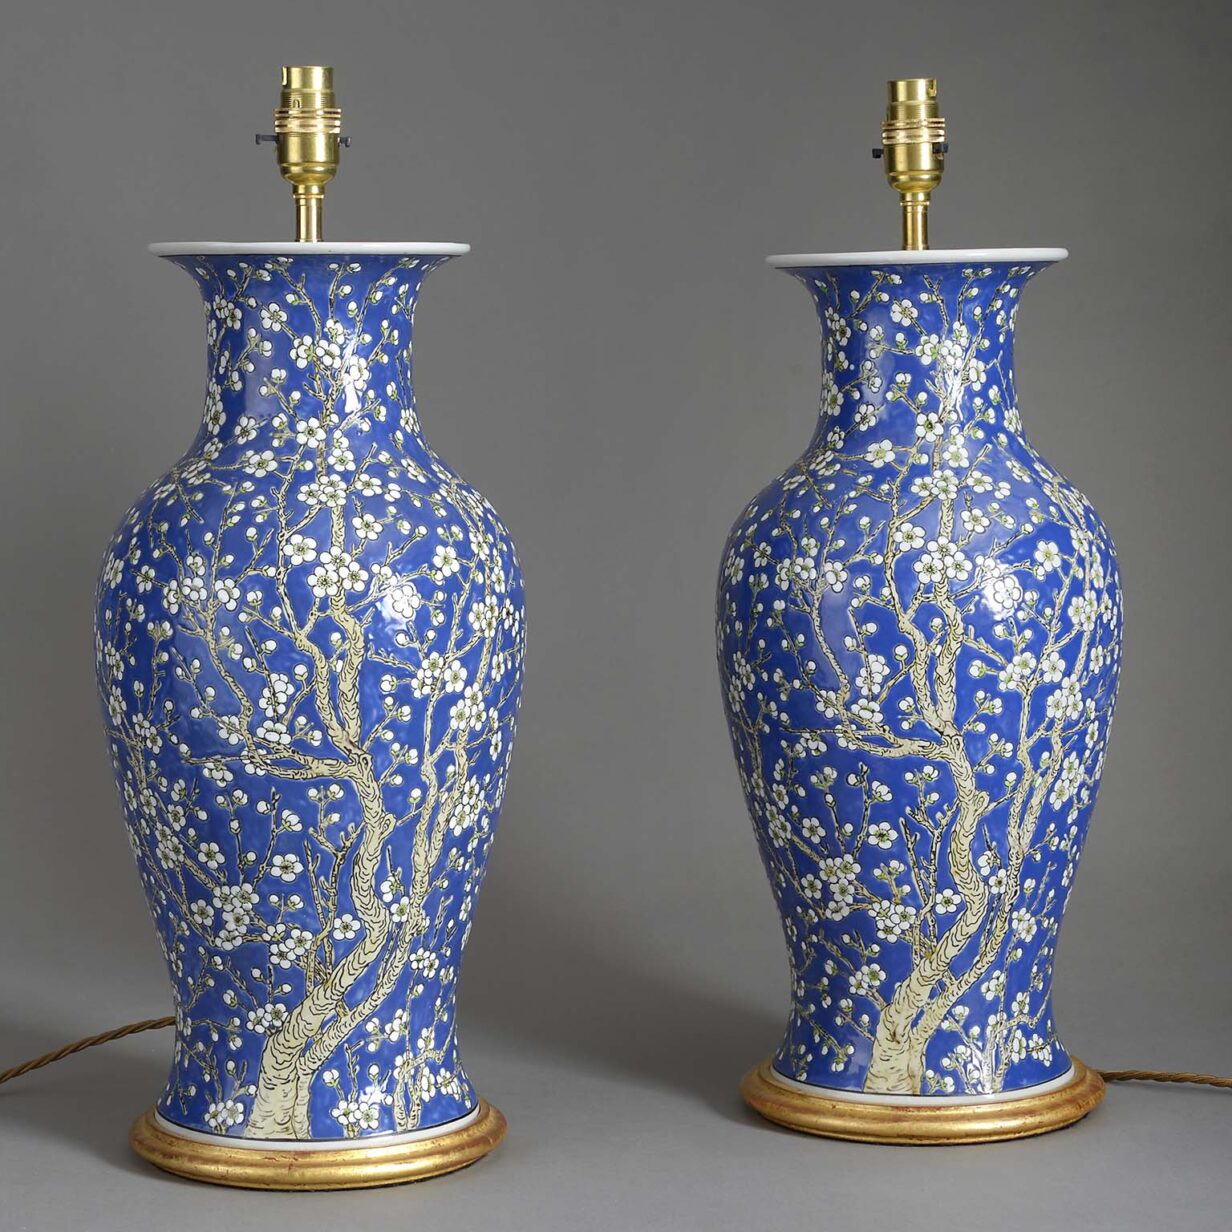 Pair of cherry blossom lamps